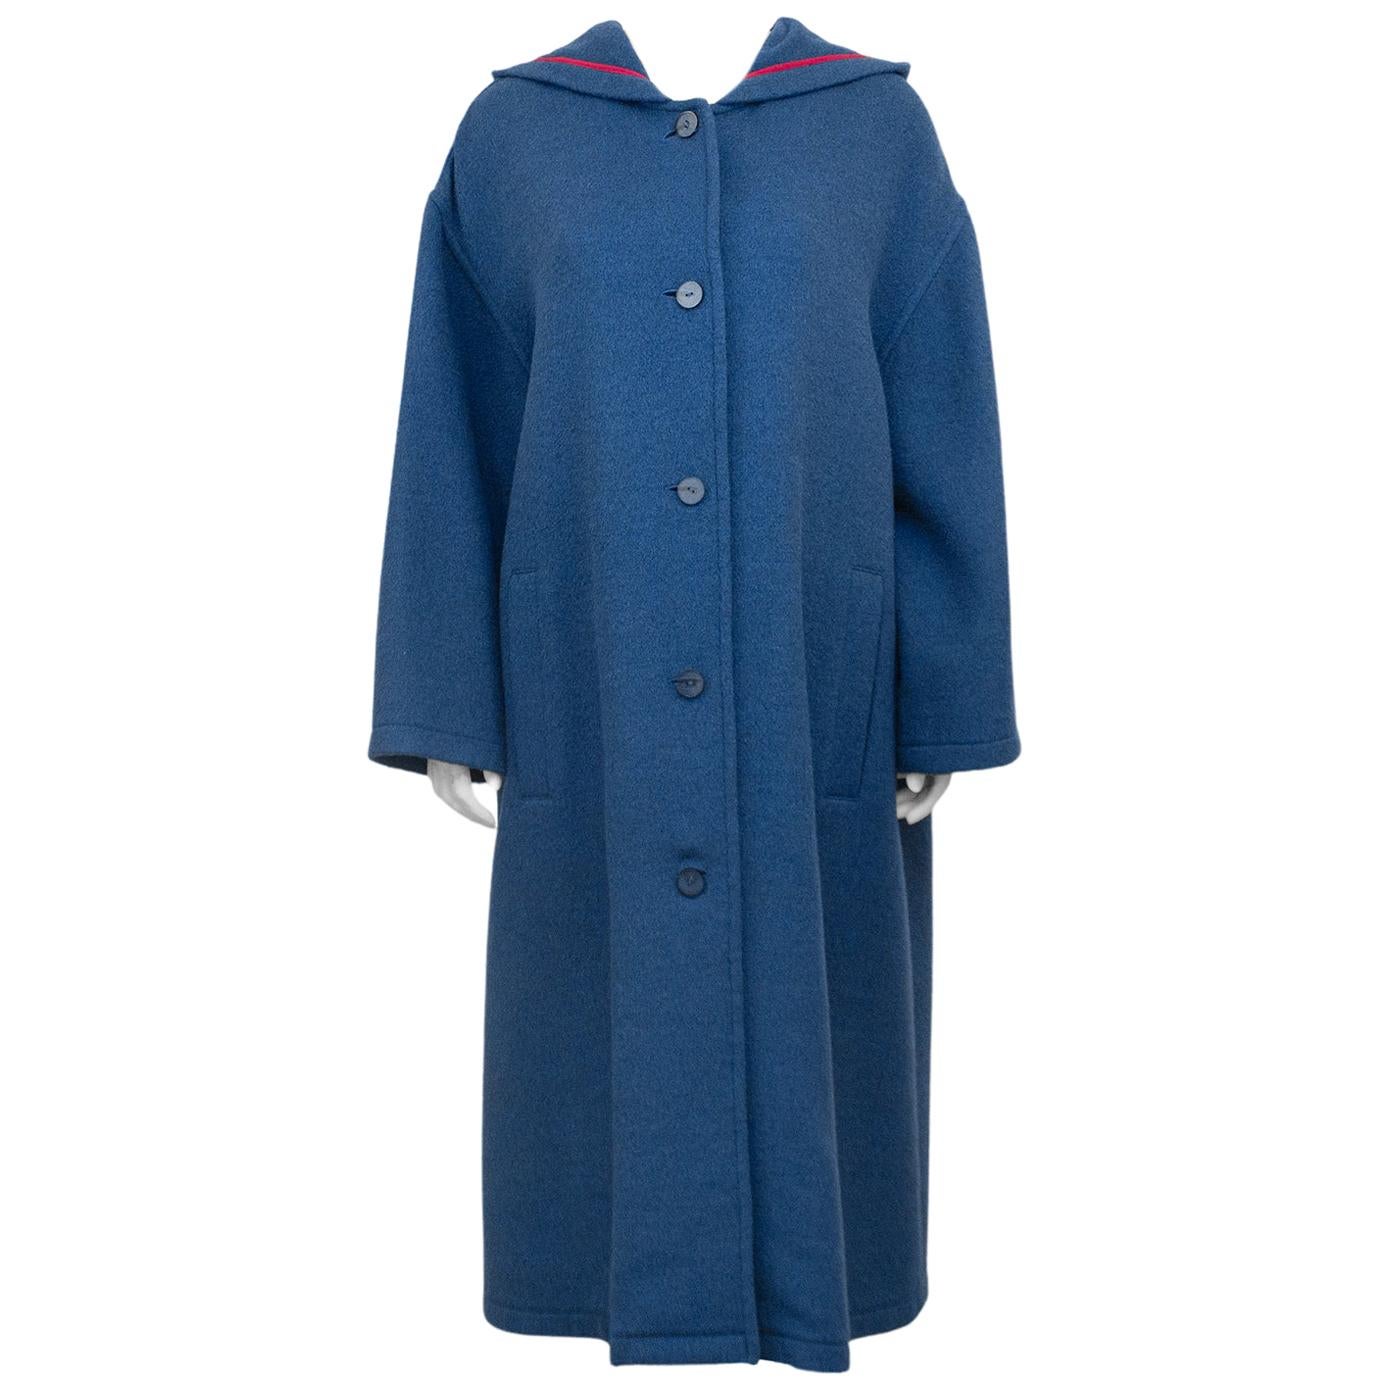 1980s Geoffrey Beene Teal Blue, Rose Trimmed Wool Coat with Hood  For Sale